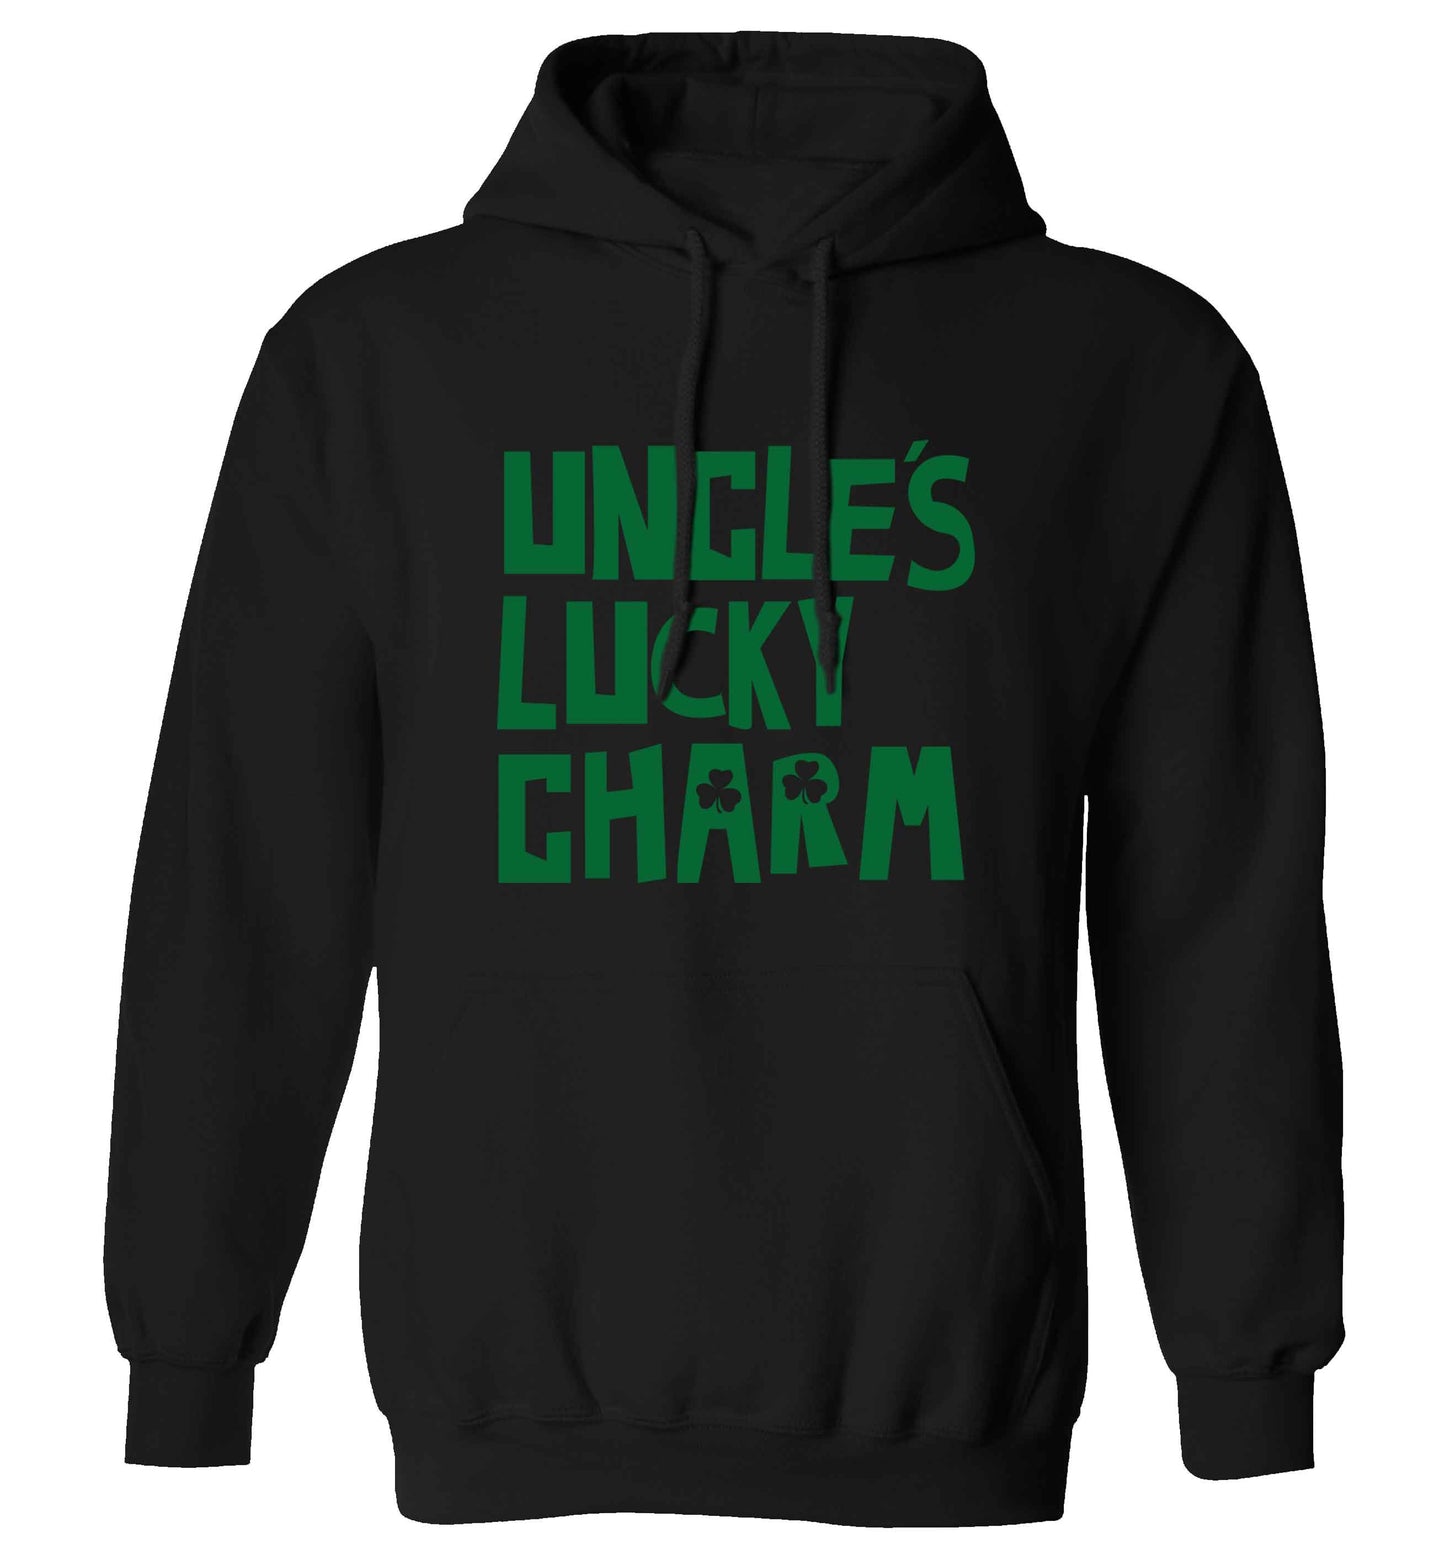 Uncles lucky charm adults unisex black hoodie 2XL